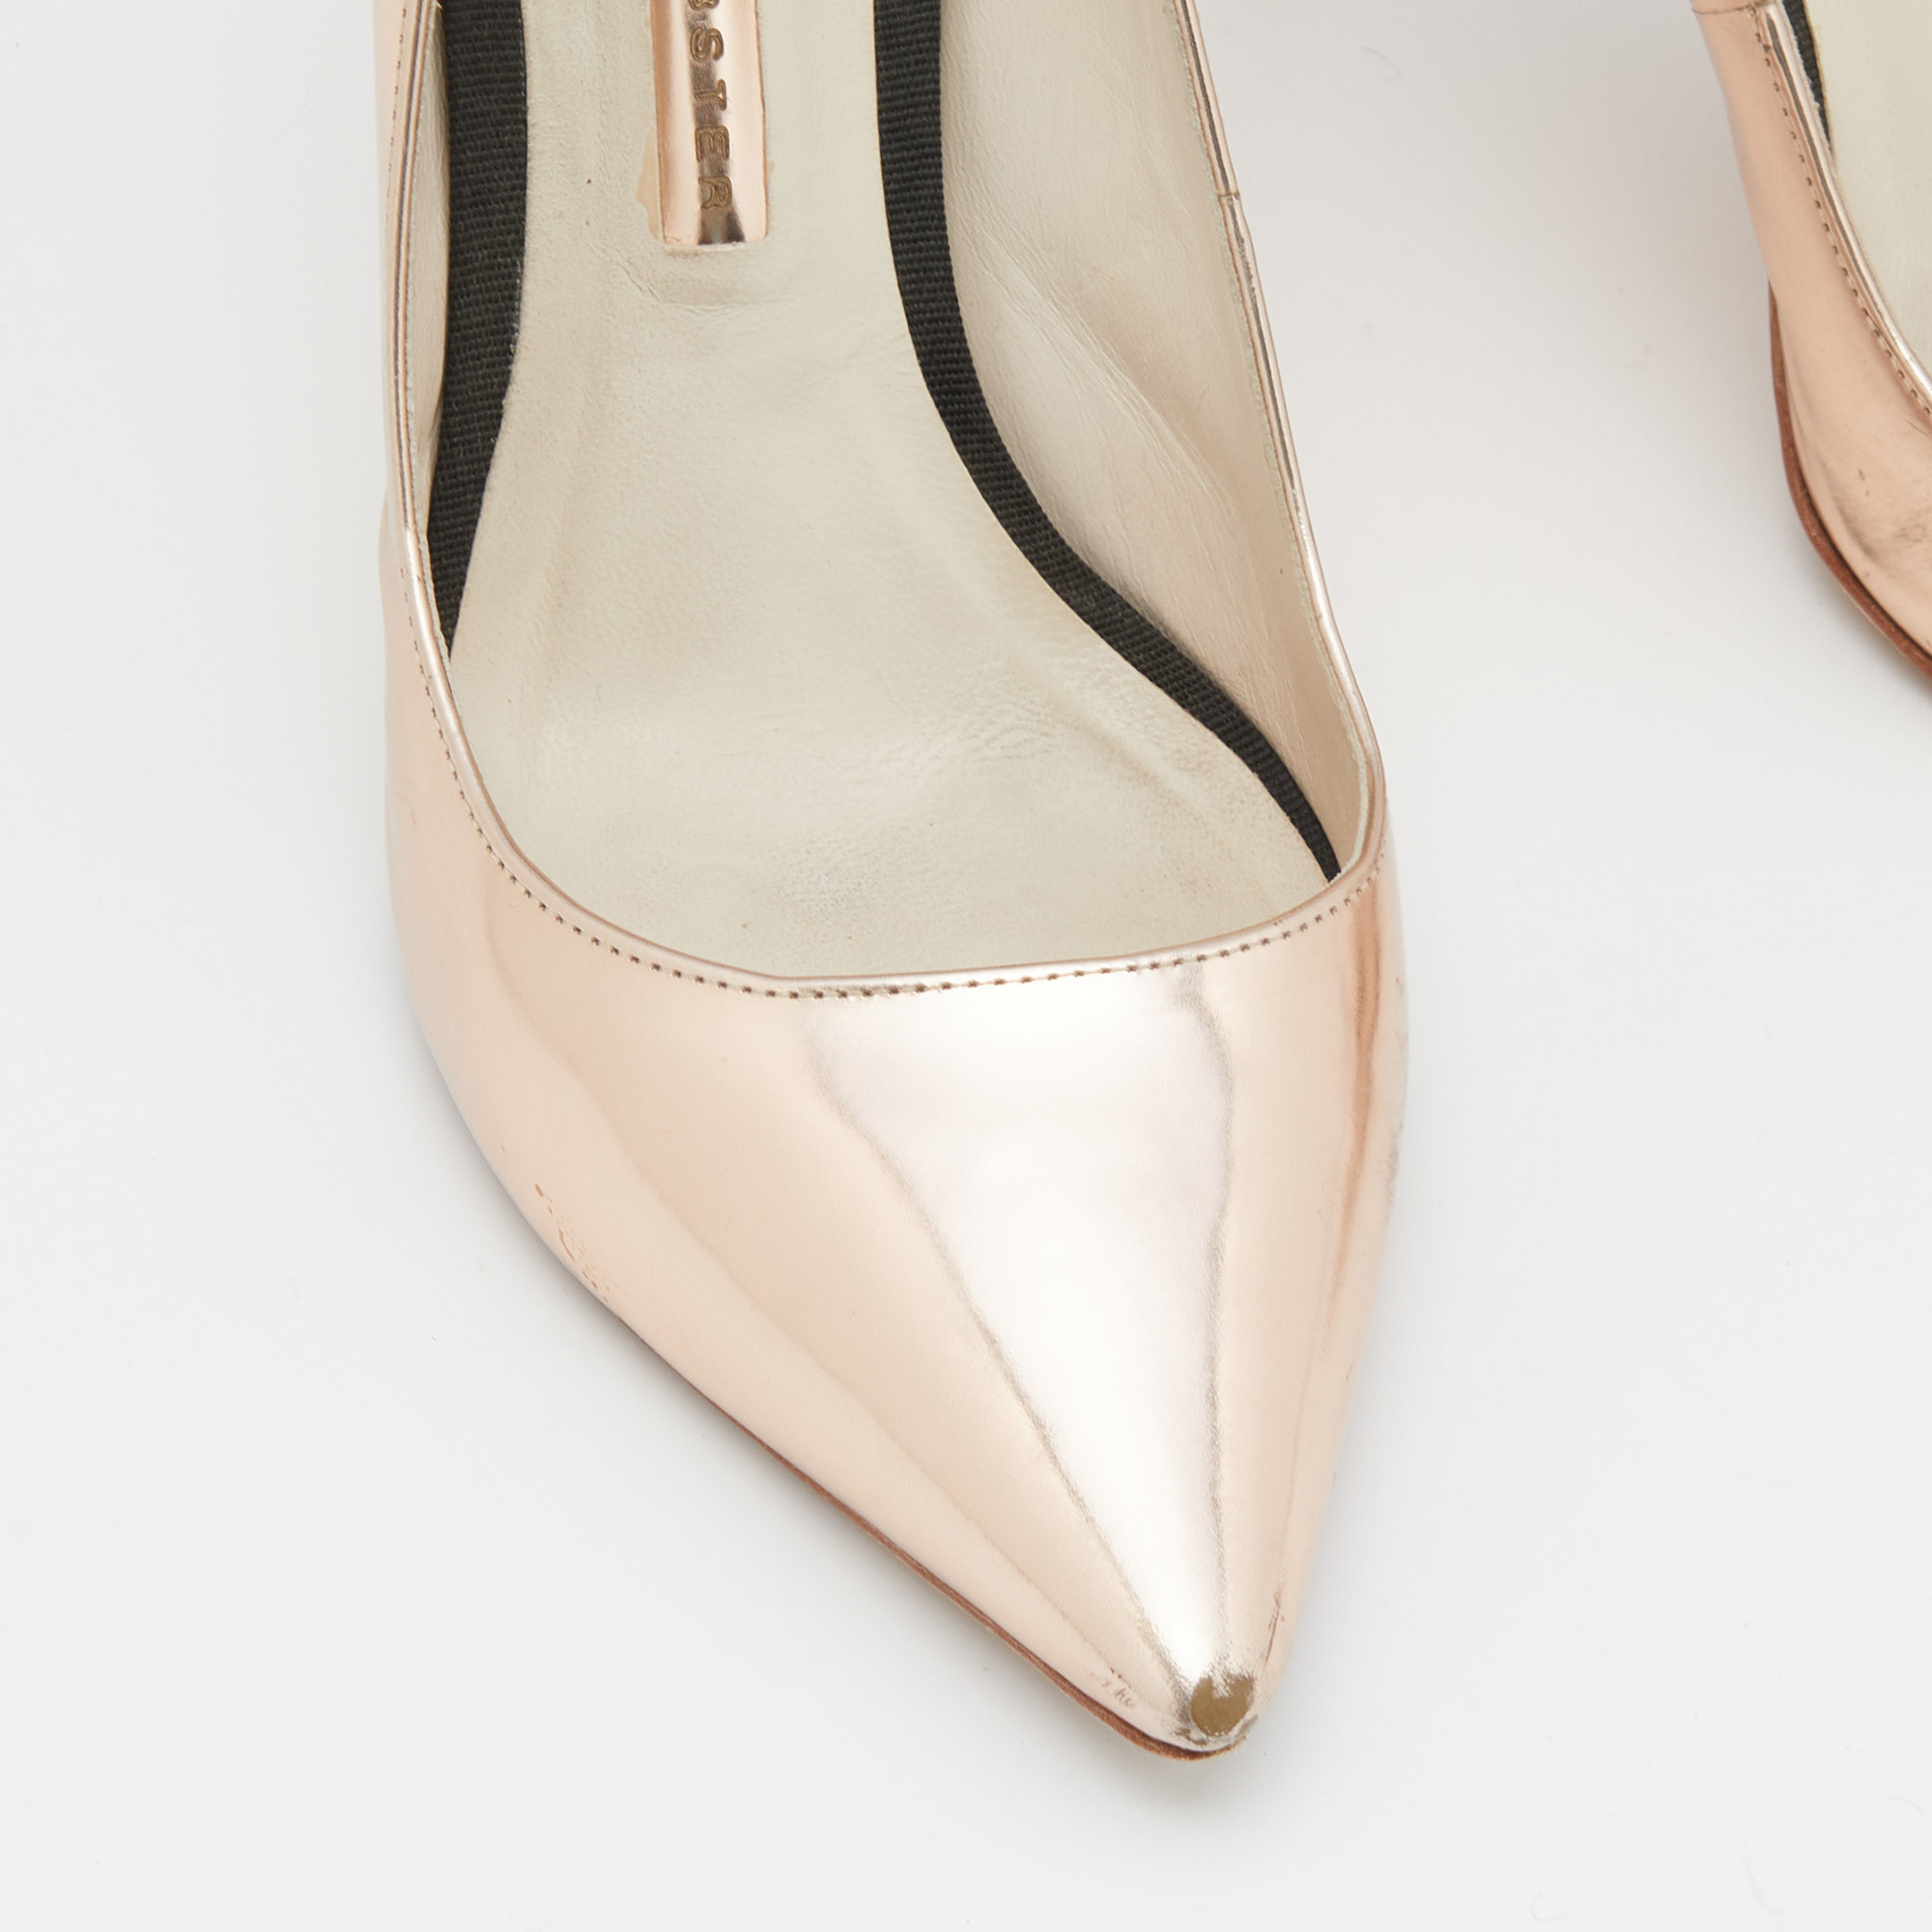 Sophia Webster Metallic Rose Gold Leather Coco Flamingo Pointed Toe Pumps Size 38.5